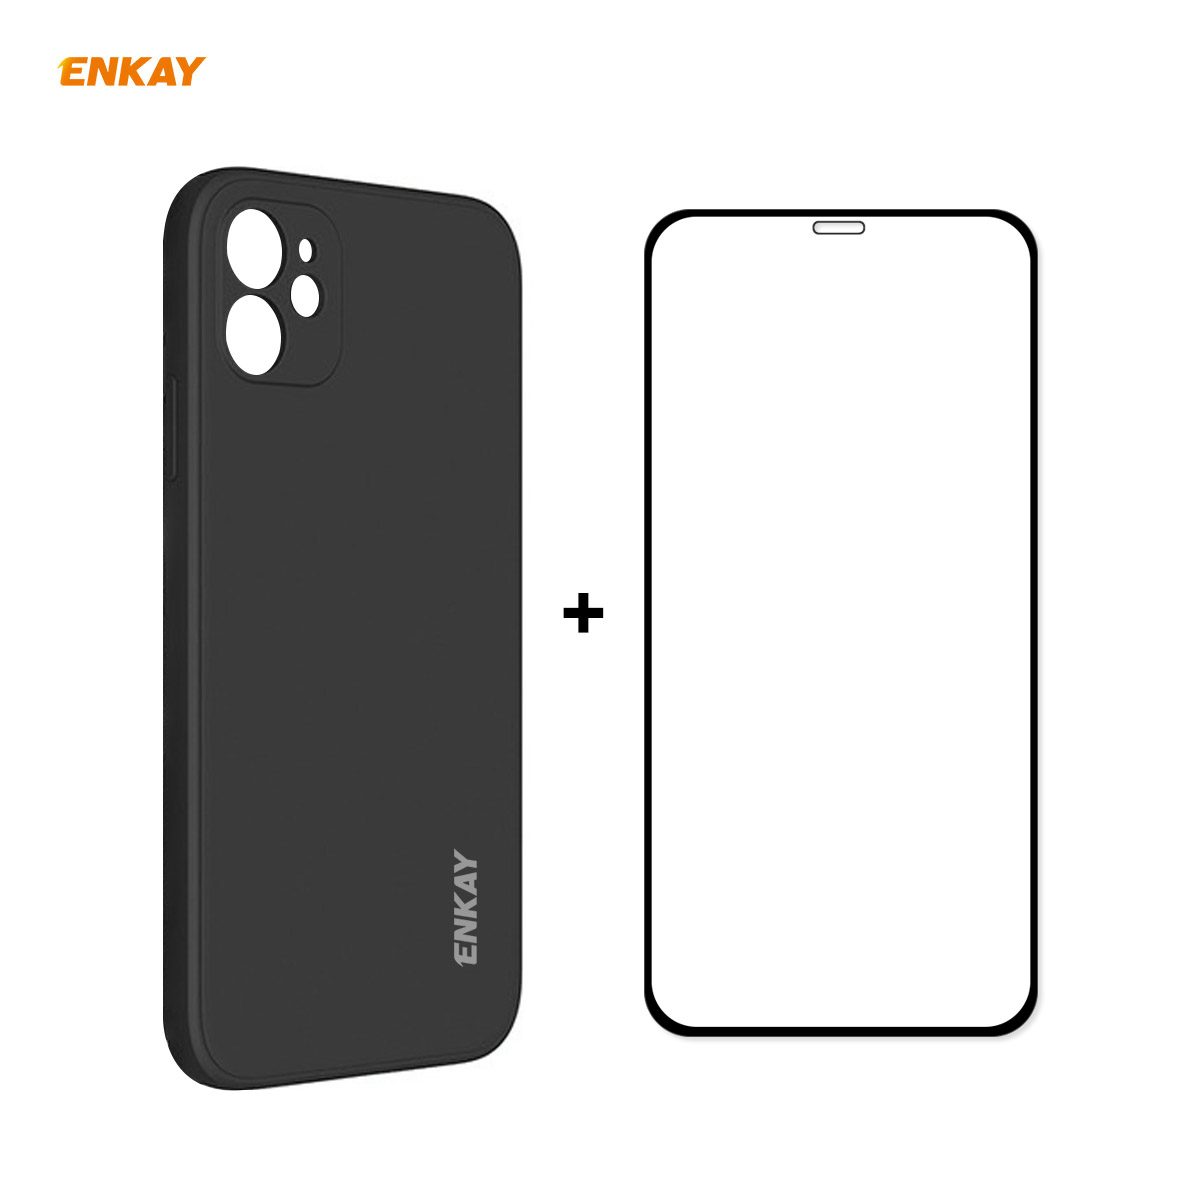 Enkay-2-in-1-for-iPhone-12-Accessories-Shockproof-with-Lens-Protector-Soft-Liquid-Silicone-Rubber-Pr-1772523-1